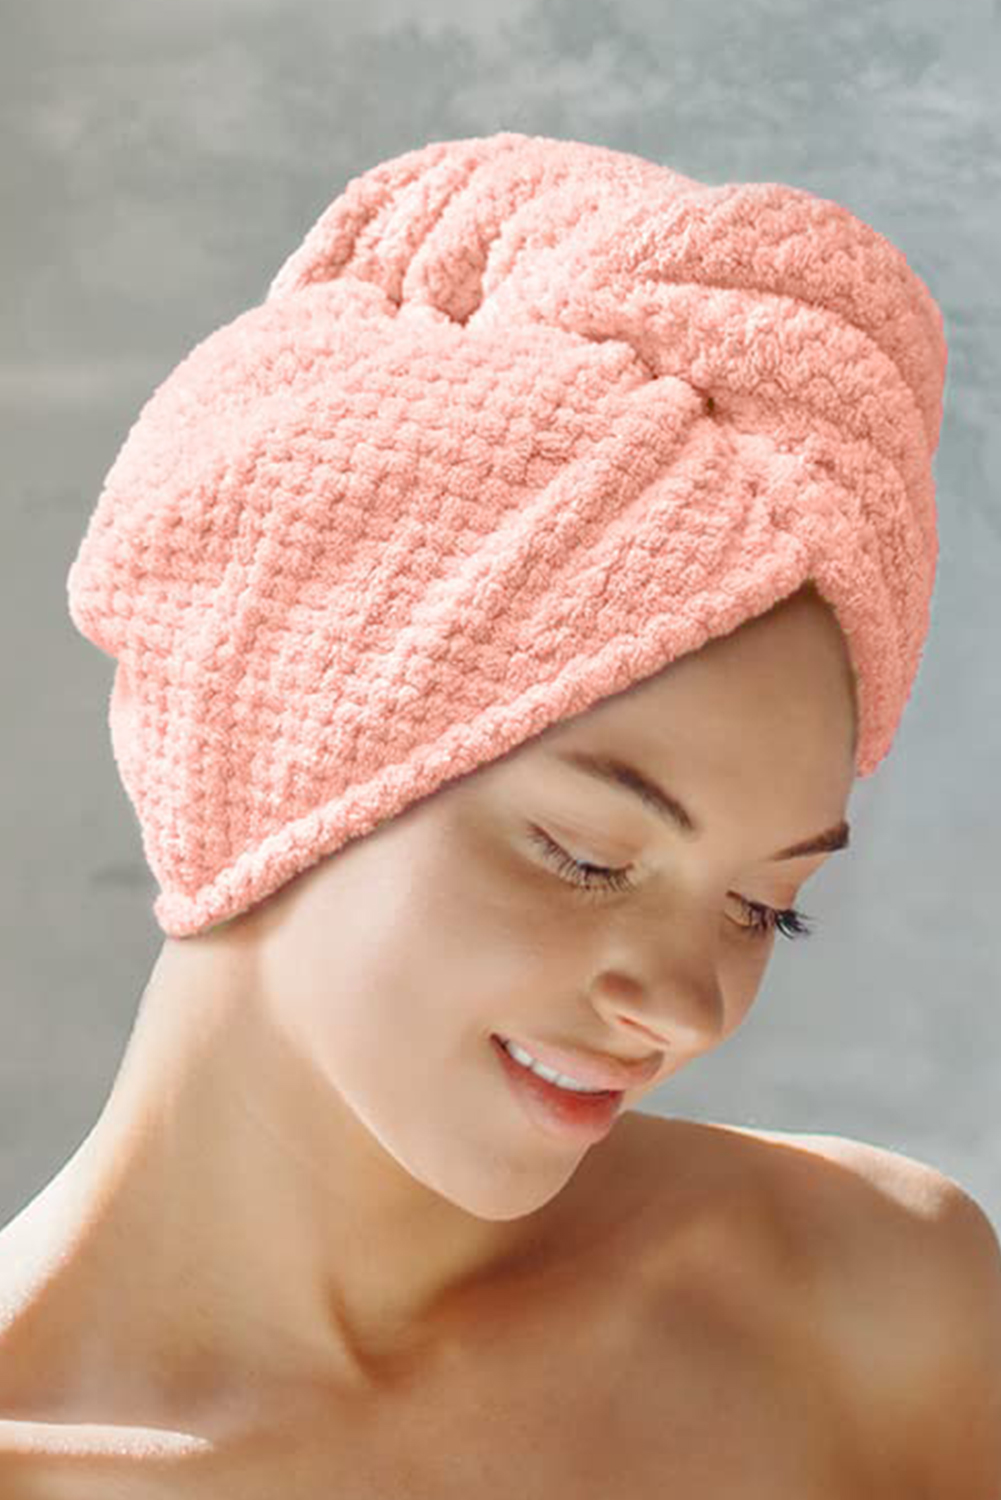 Shewin Wholesale Western Pink Super-Absorbent Quick Drying Microfiber Hair TOWEL